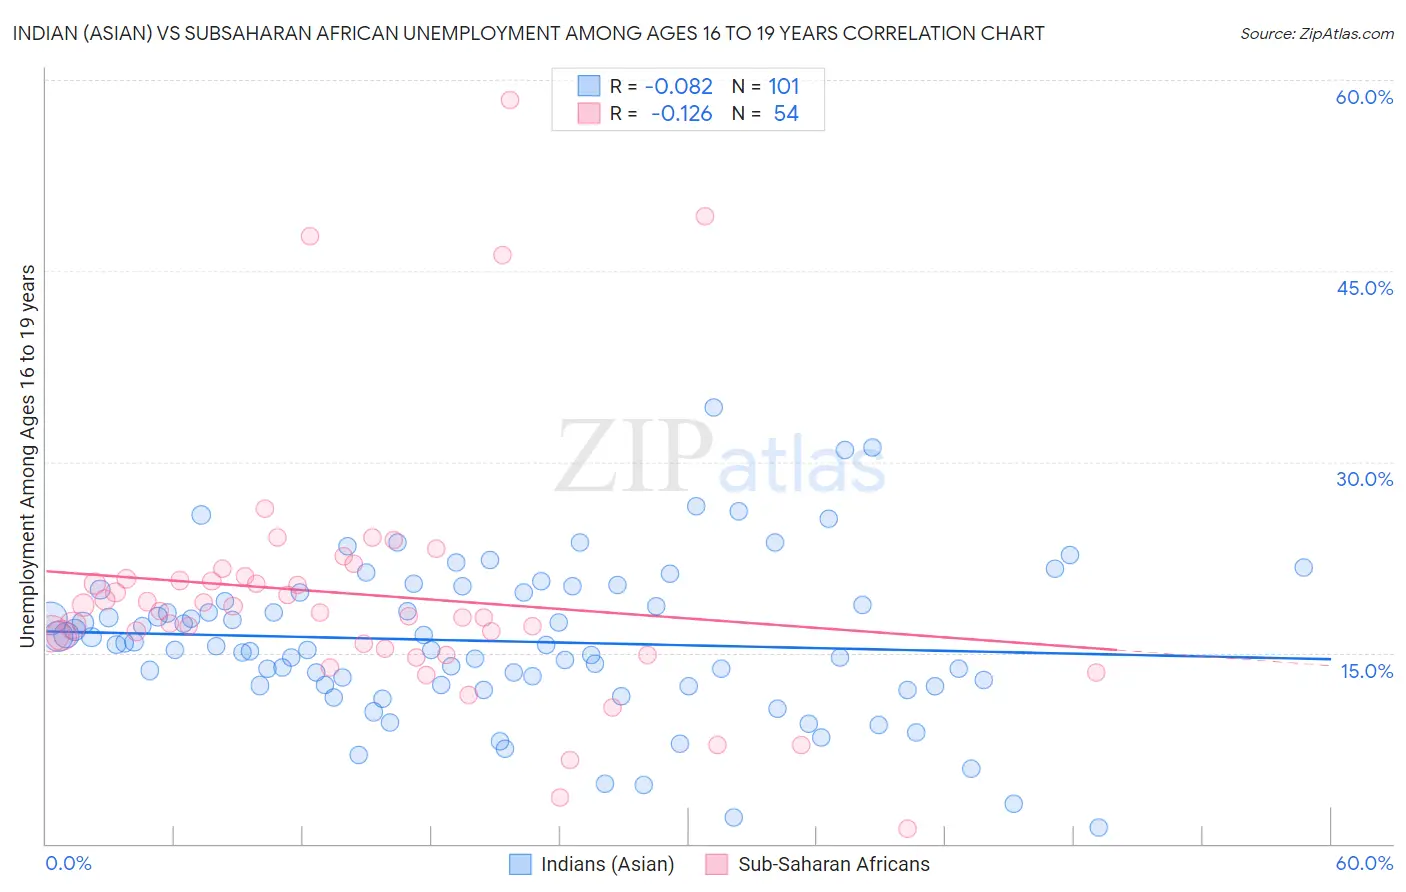 Indian (Asian) vs Subsaharan African Unemployment Among Ages 16 to 19 years